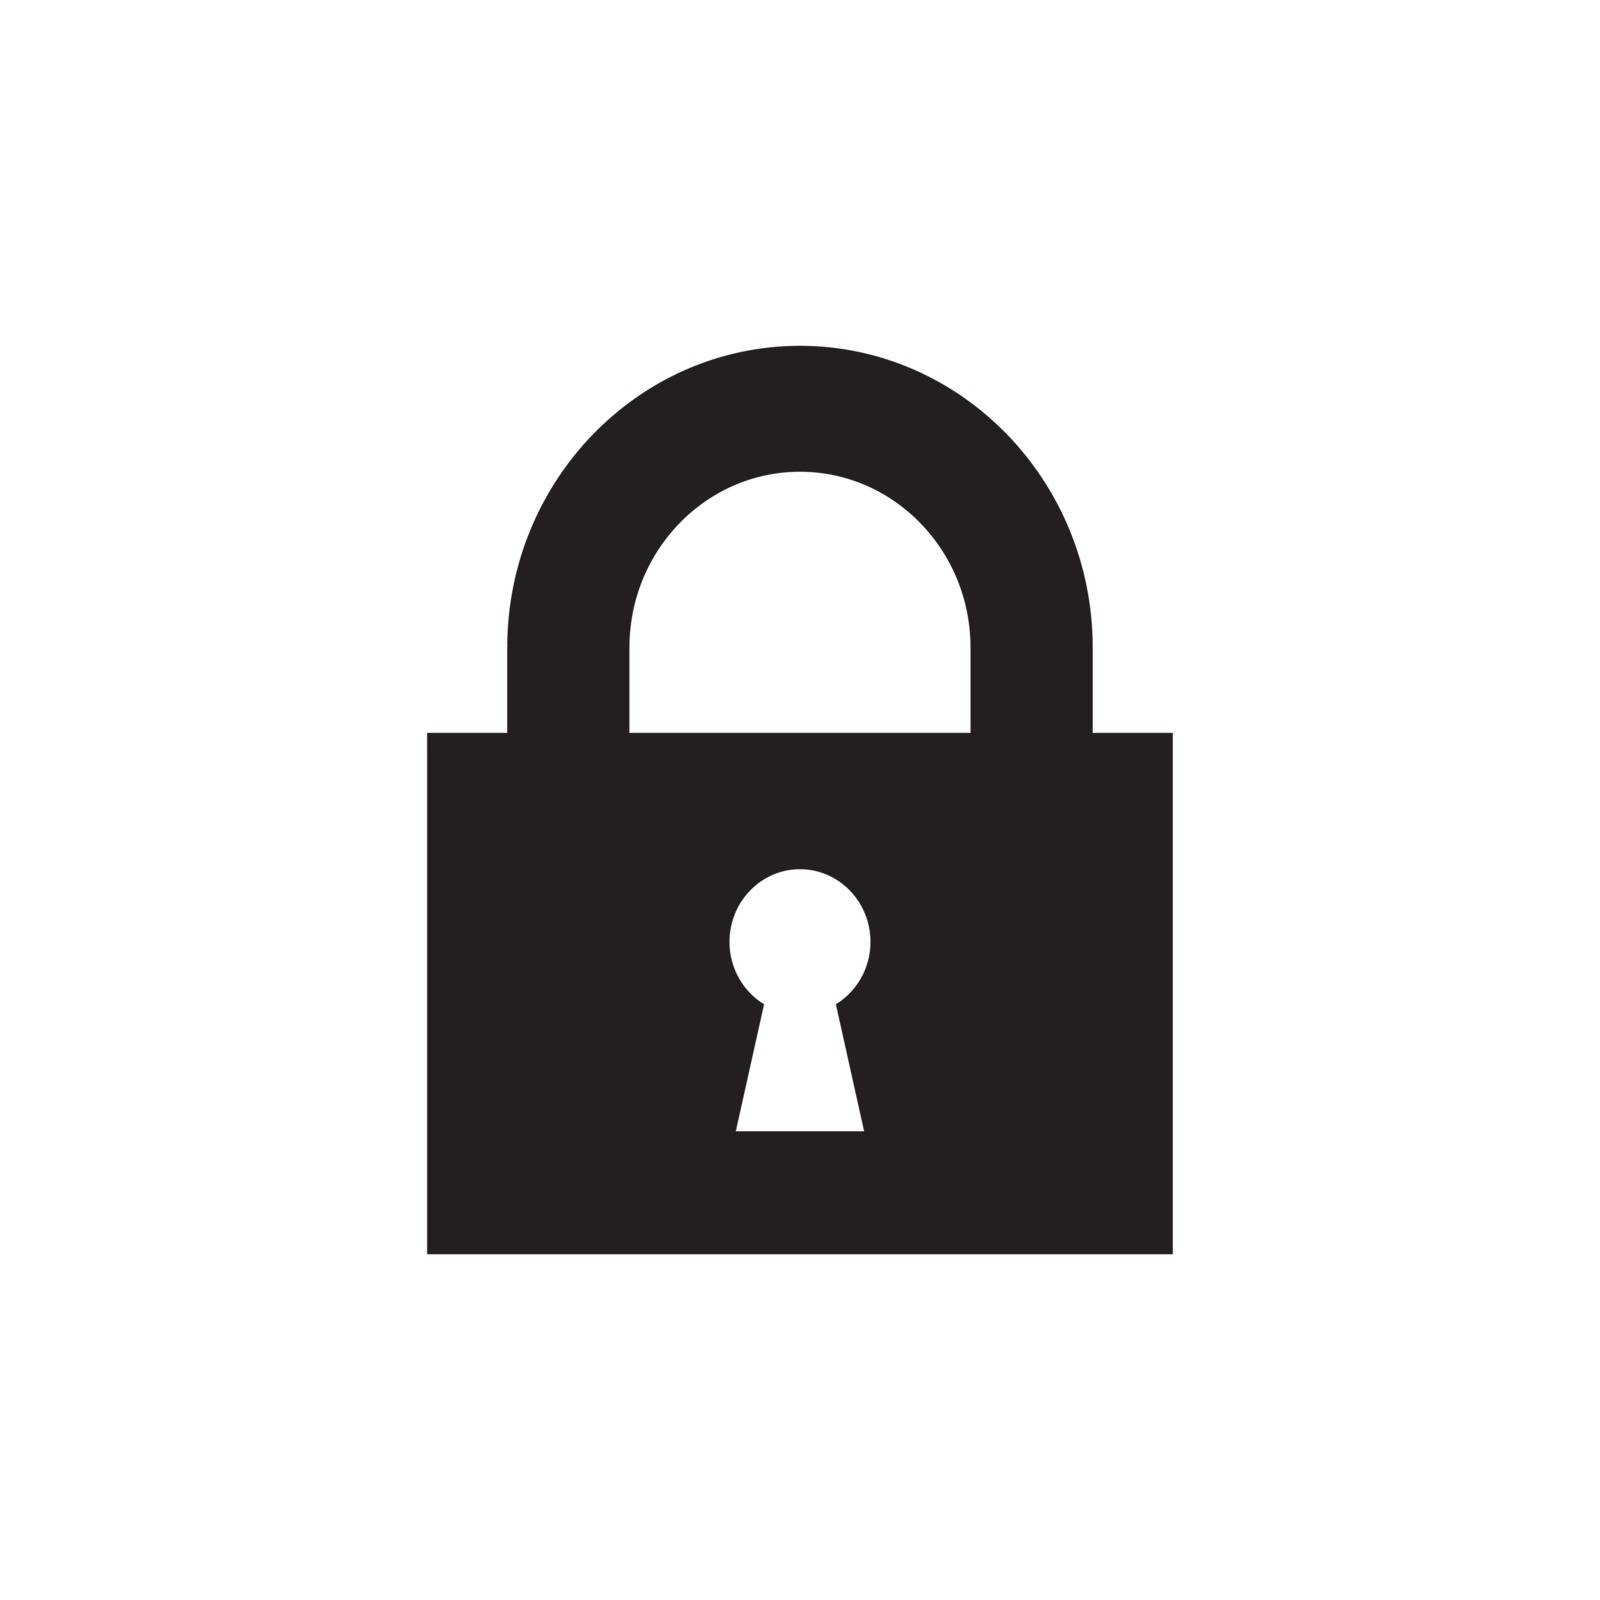 lock vector icon illustration by barks